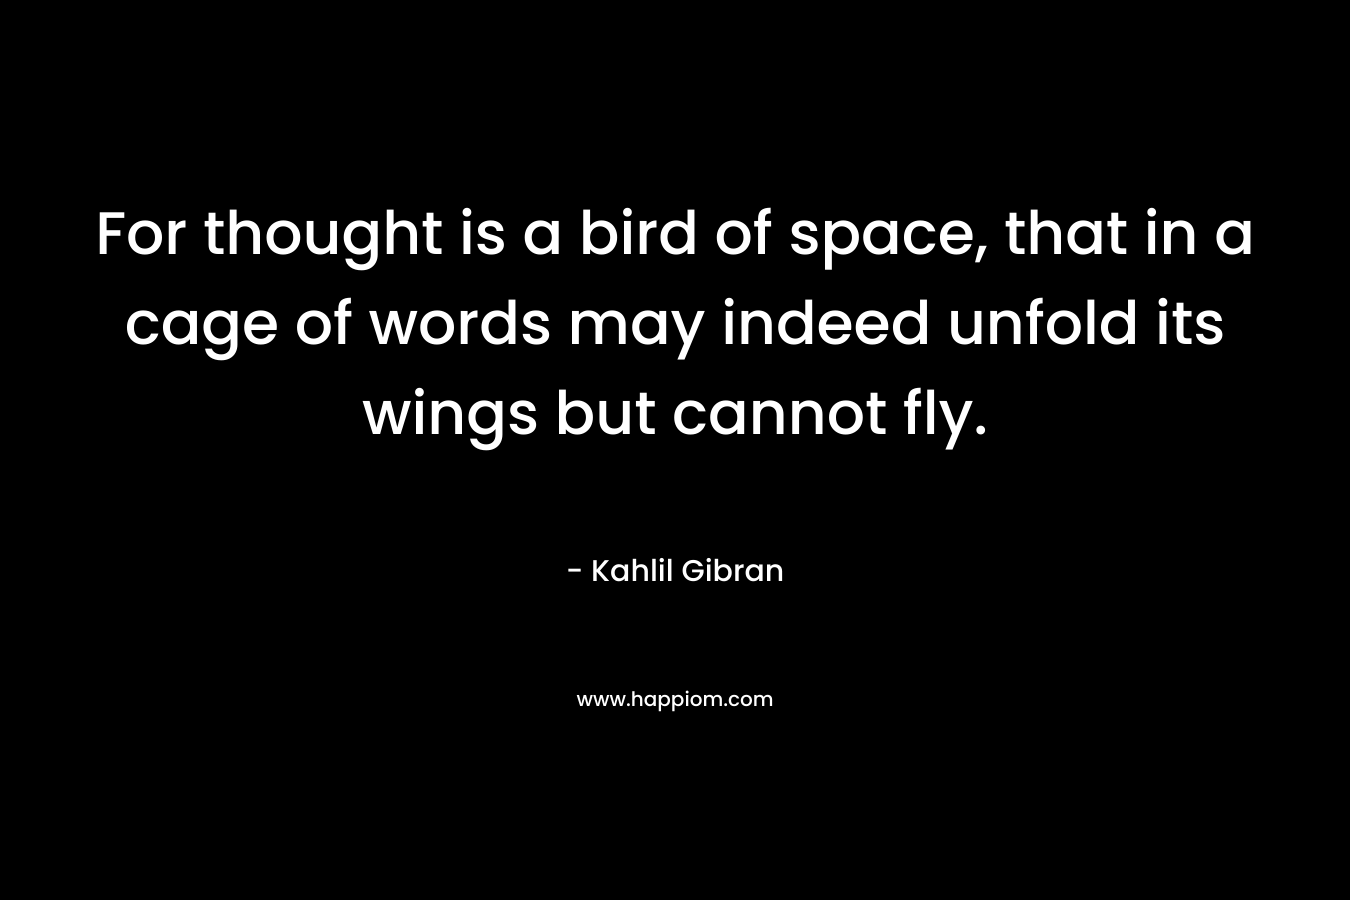 For thought is a bird of space, that in a cage of words may indeed unfold its wings but cannot fly.